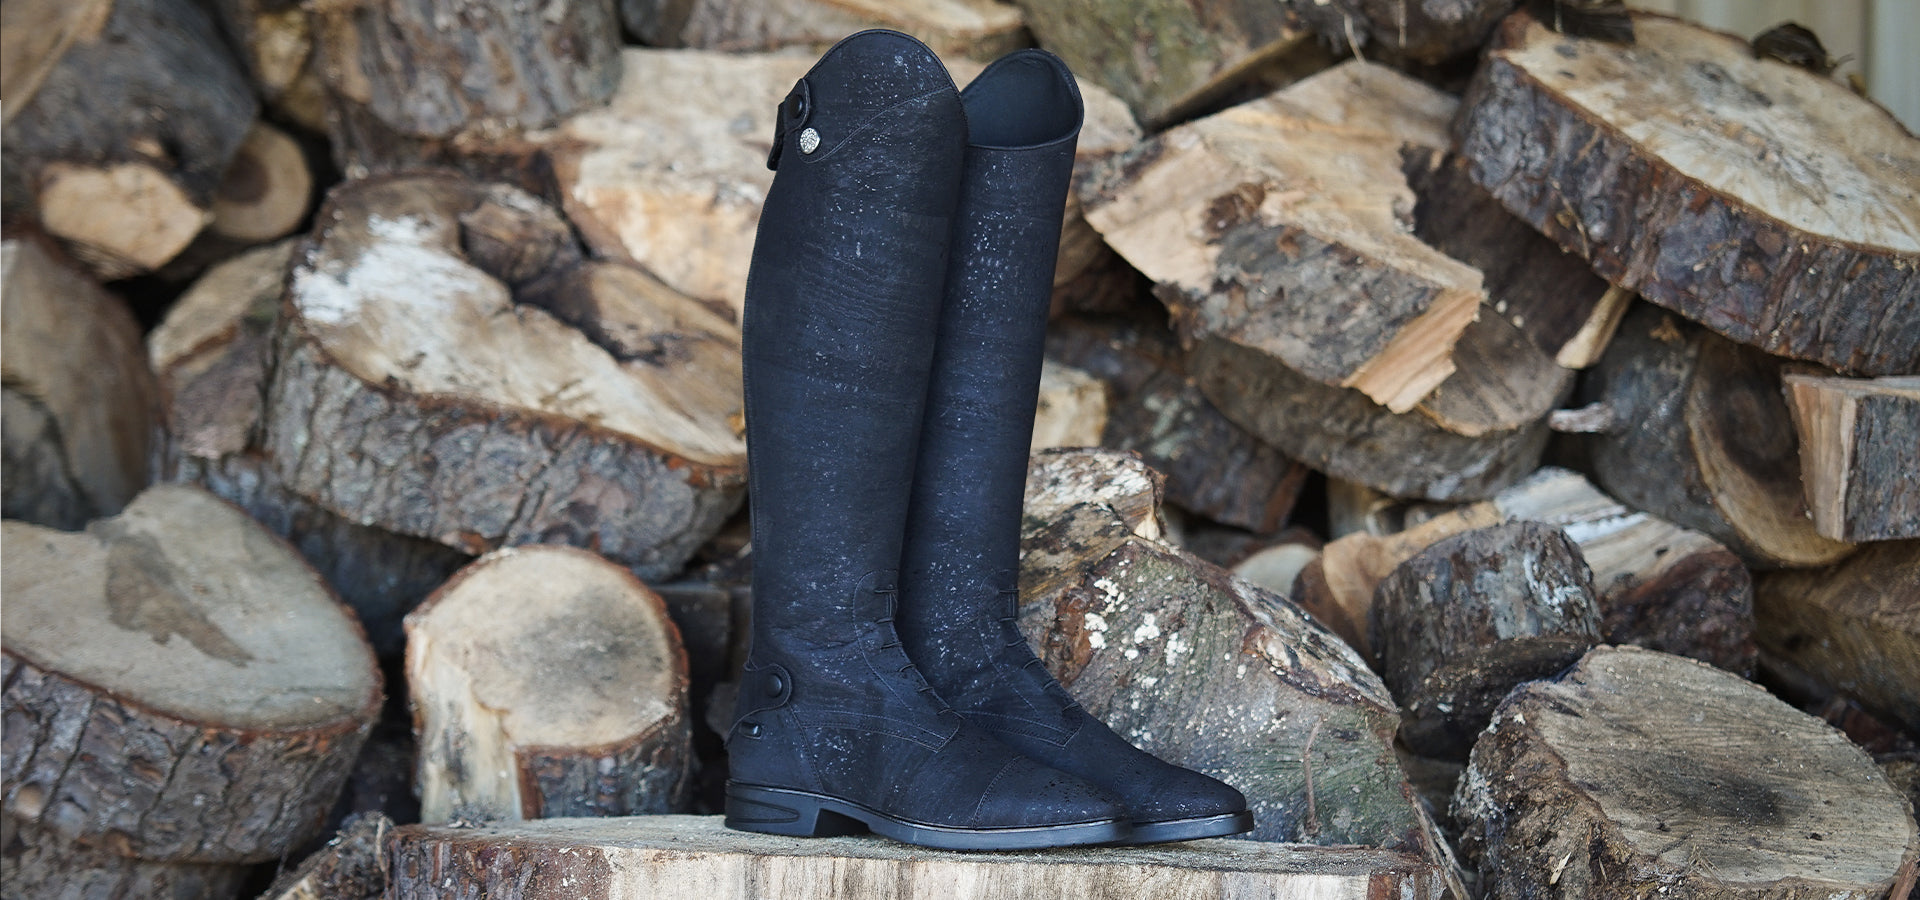 Equestrian cork riding boot displayed on top of a wooden stump